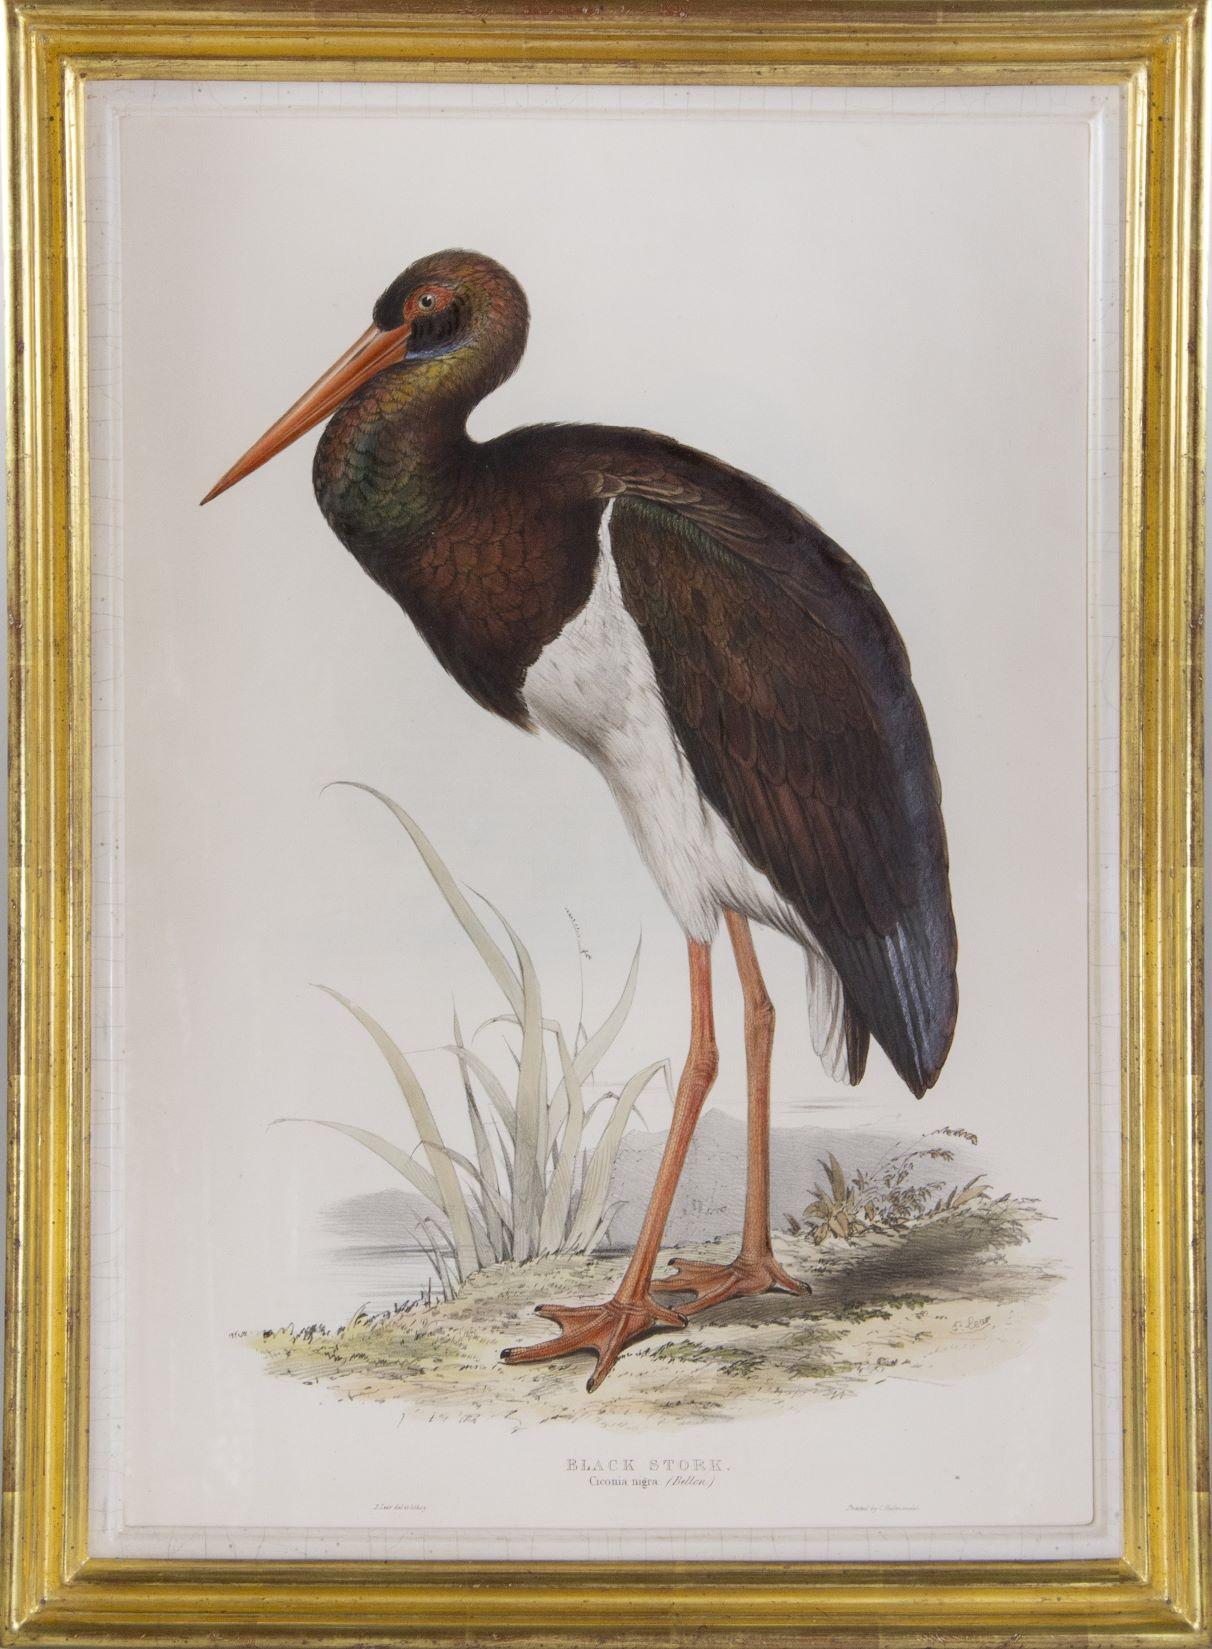 A Group of Four Wading Birds. - Print by Edward Lear